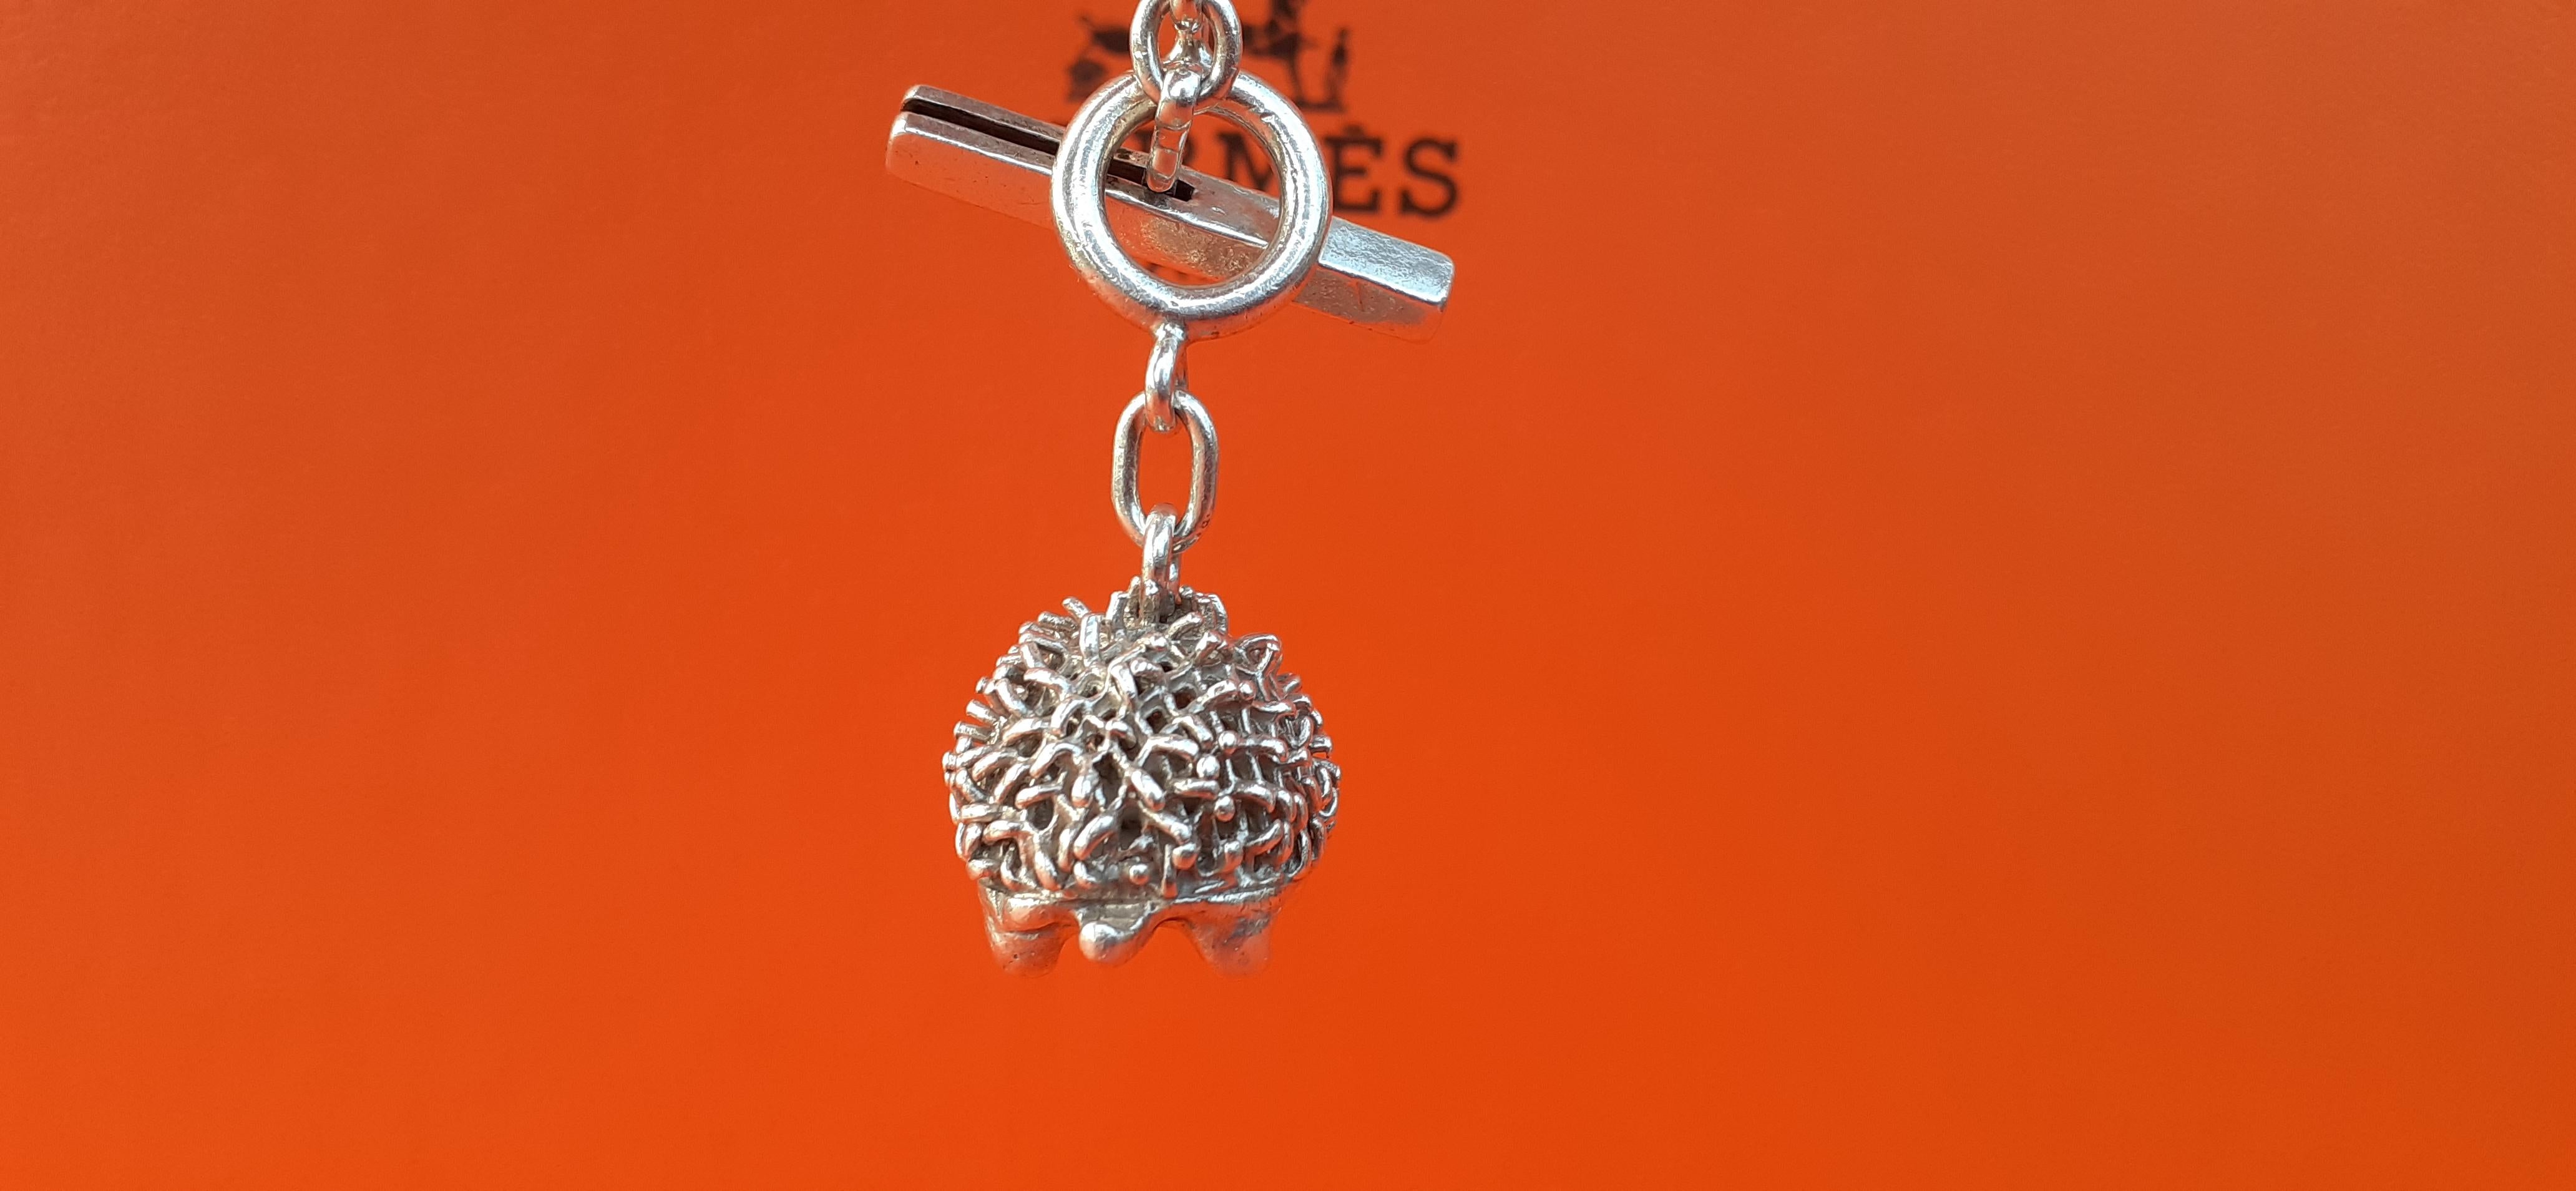 Exceptional Hermès Key Chain Charm Cute Hedgehog in Silver For Sale 5